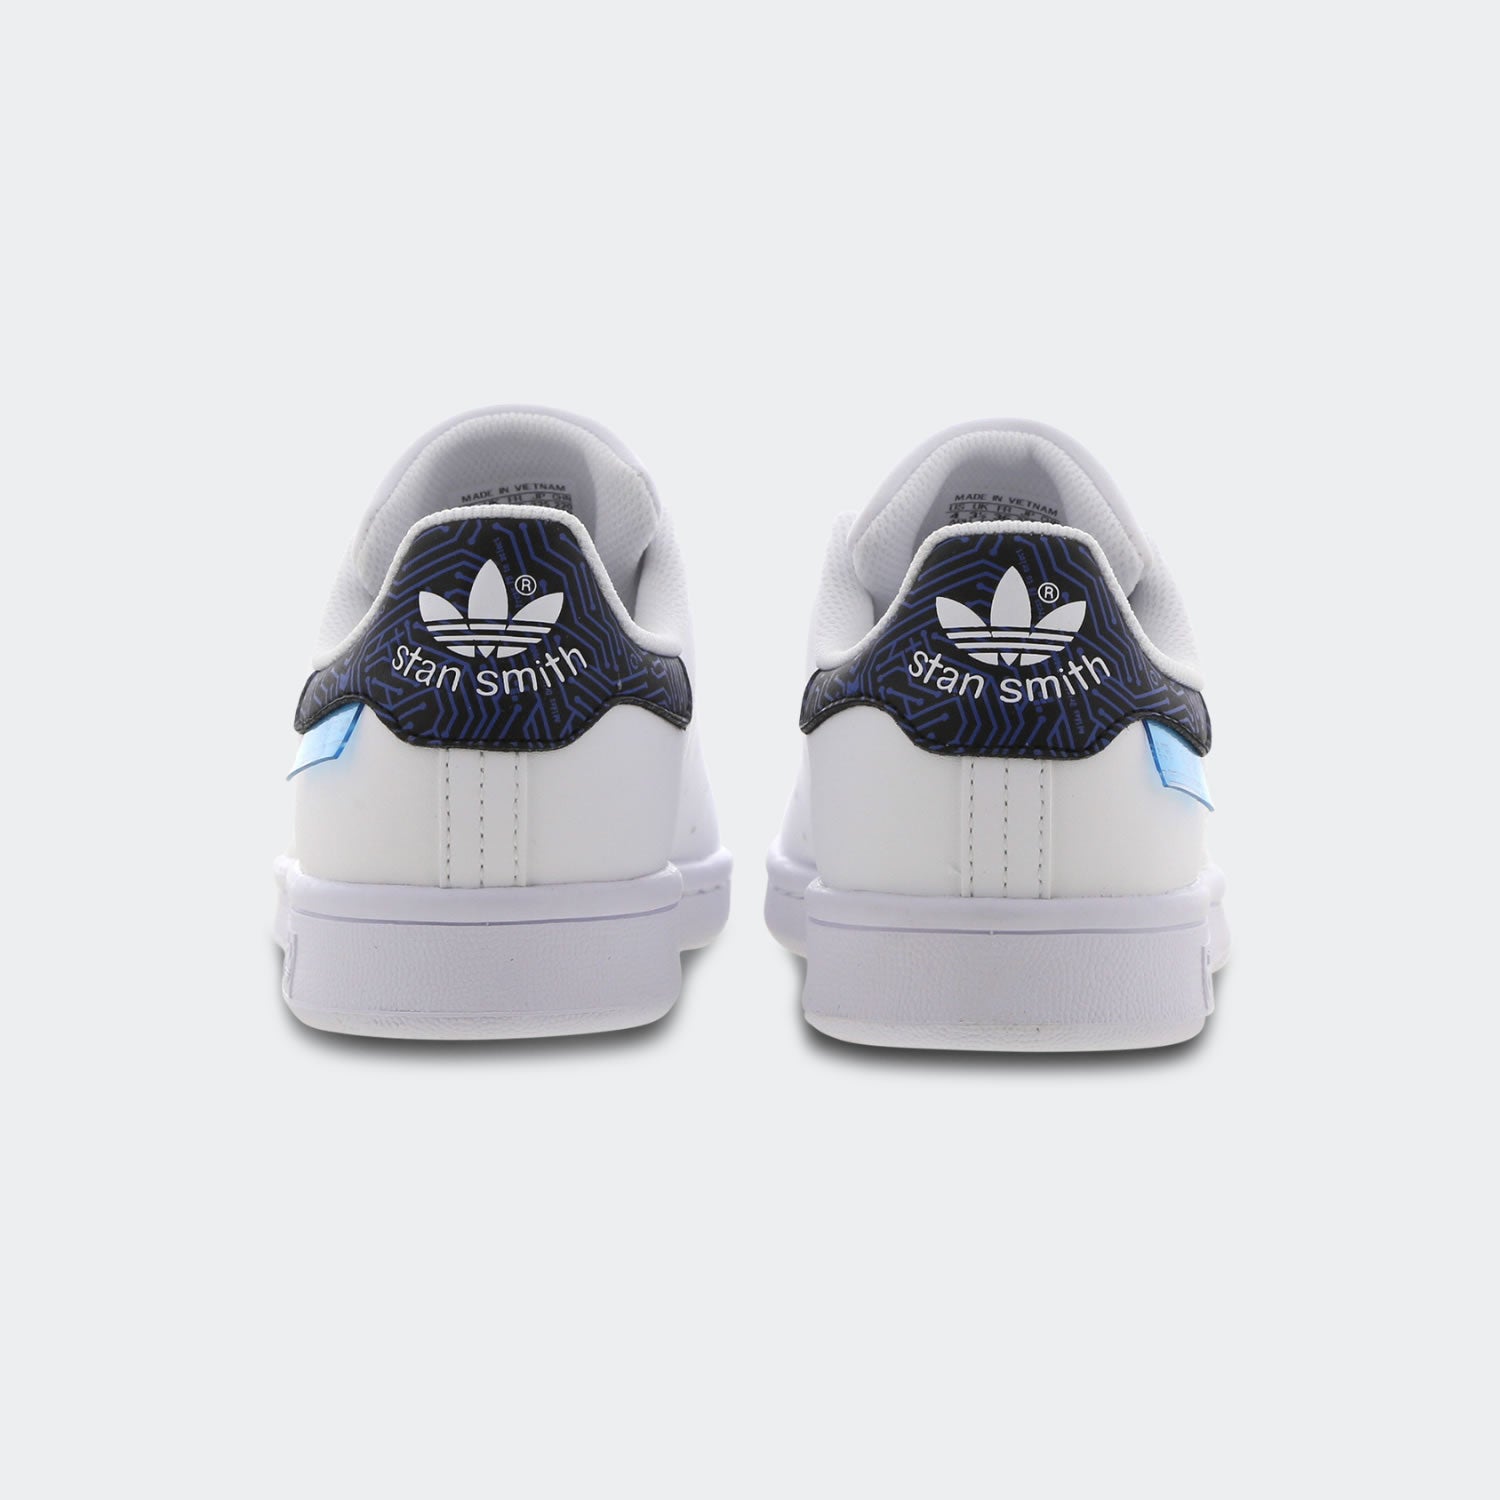 tradesports.co.uk Adidas Juniors Stan Smith Shoes FY1556